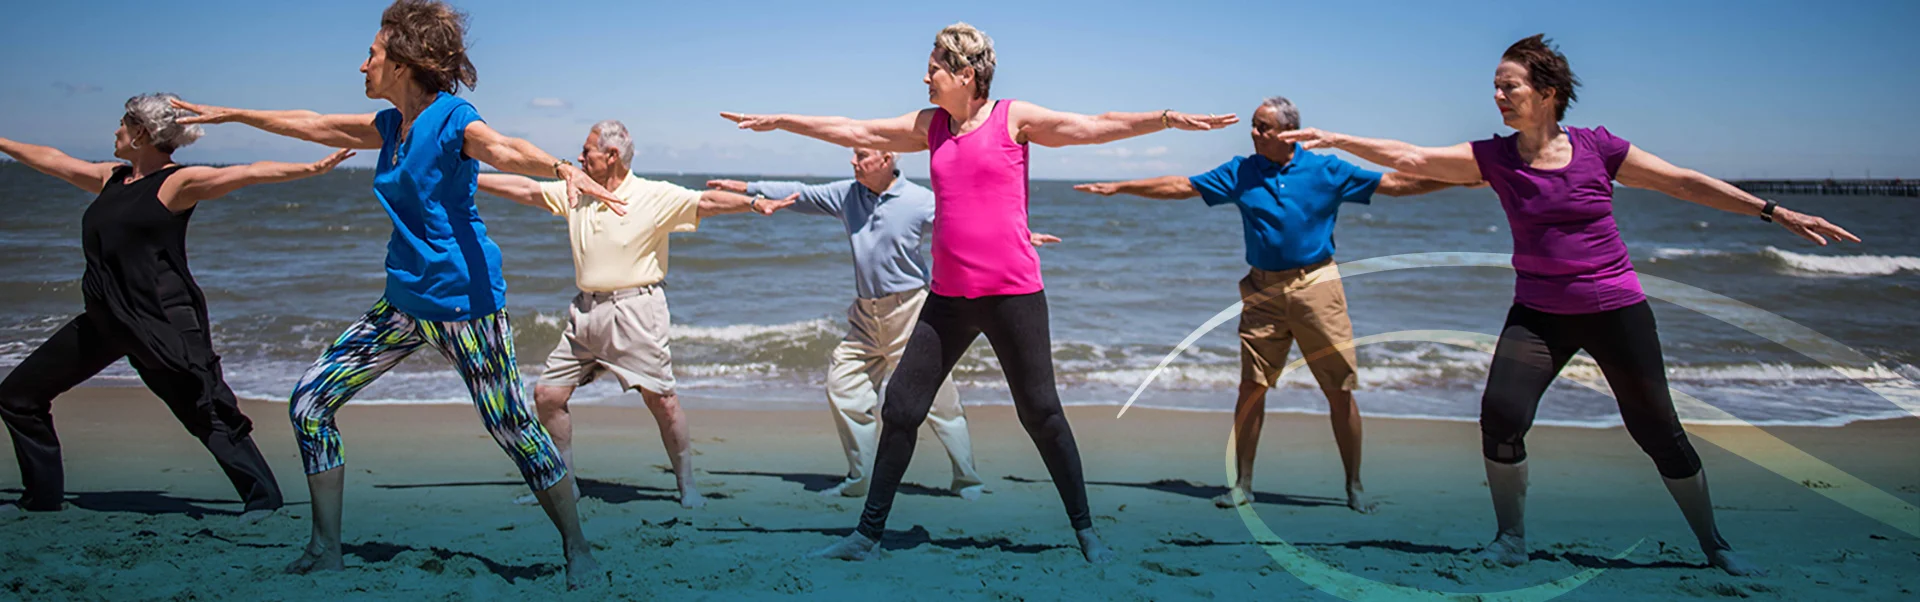 Group of People Performing Yoga Exercise at the Beach